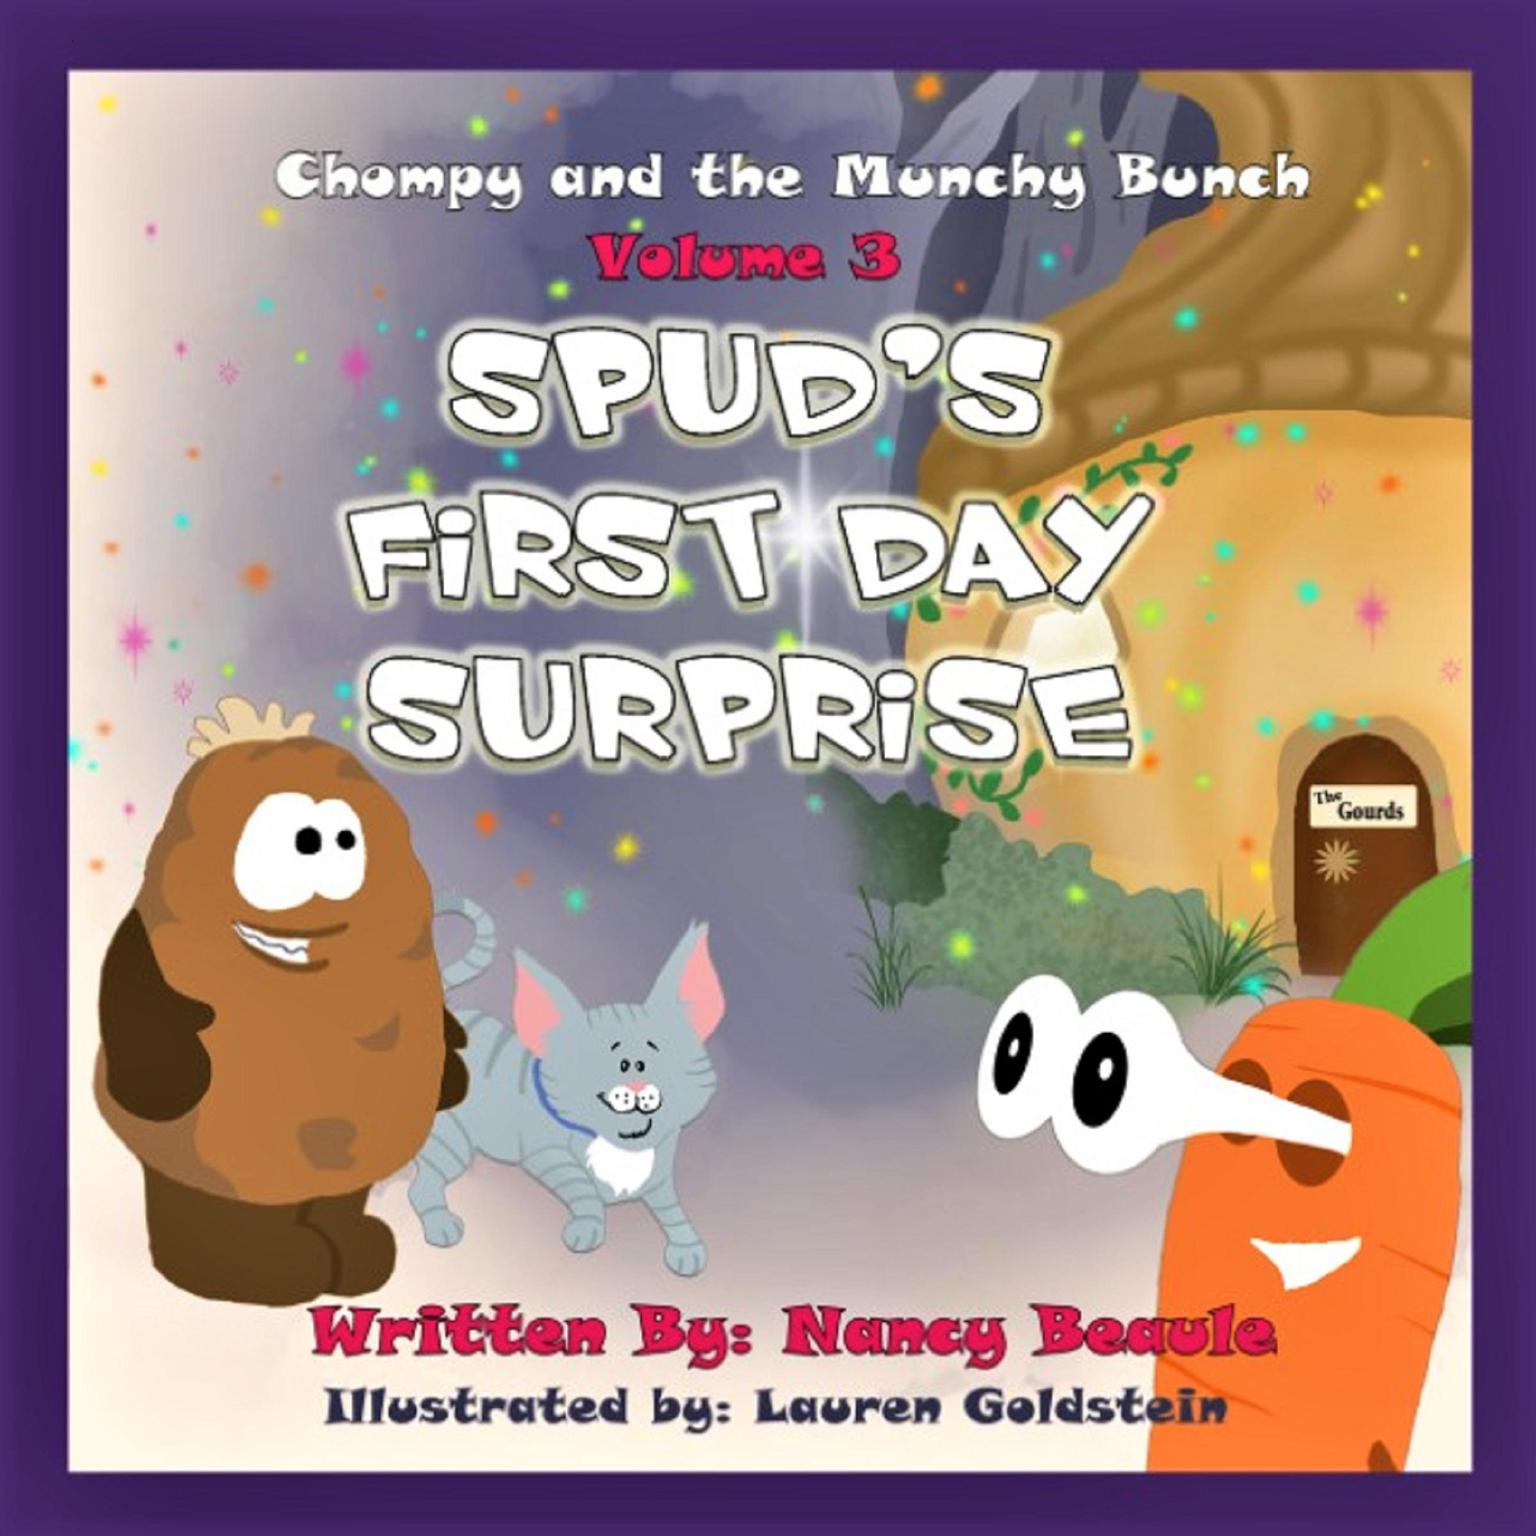 Spuds First Day Surprise Audiobook, by Nancy Beaule